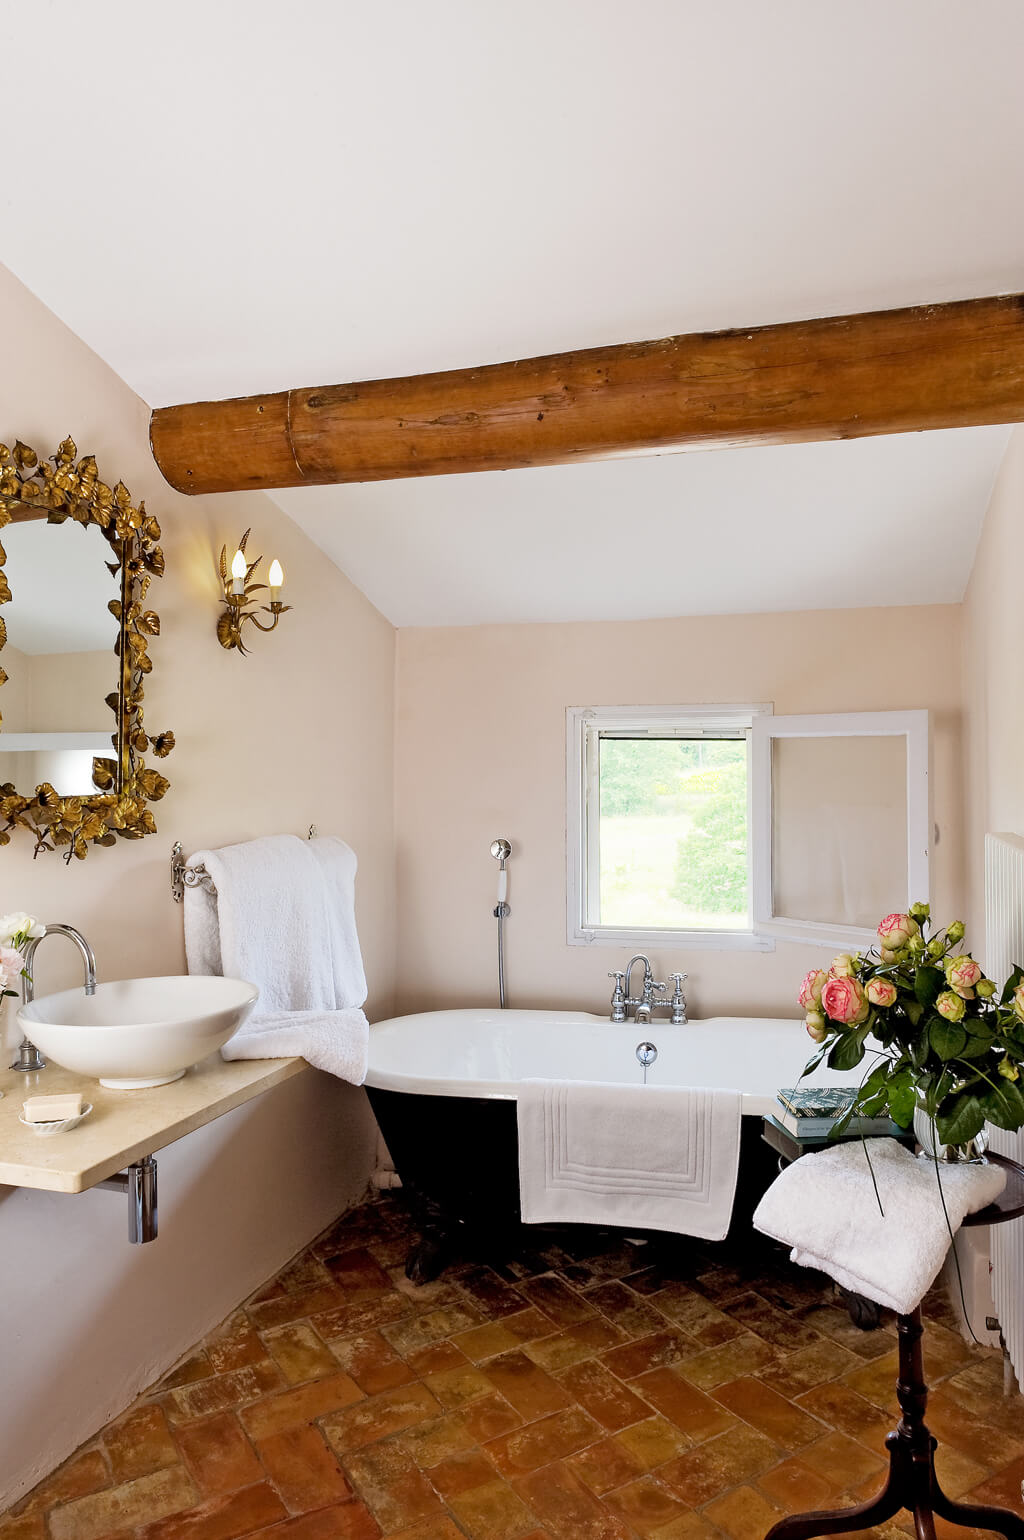 Old World French bathroom with clawfoot tub, terracotta floor, and pale plaster walls - Villa St.-Saturnin by Haven In.